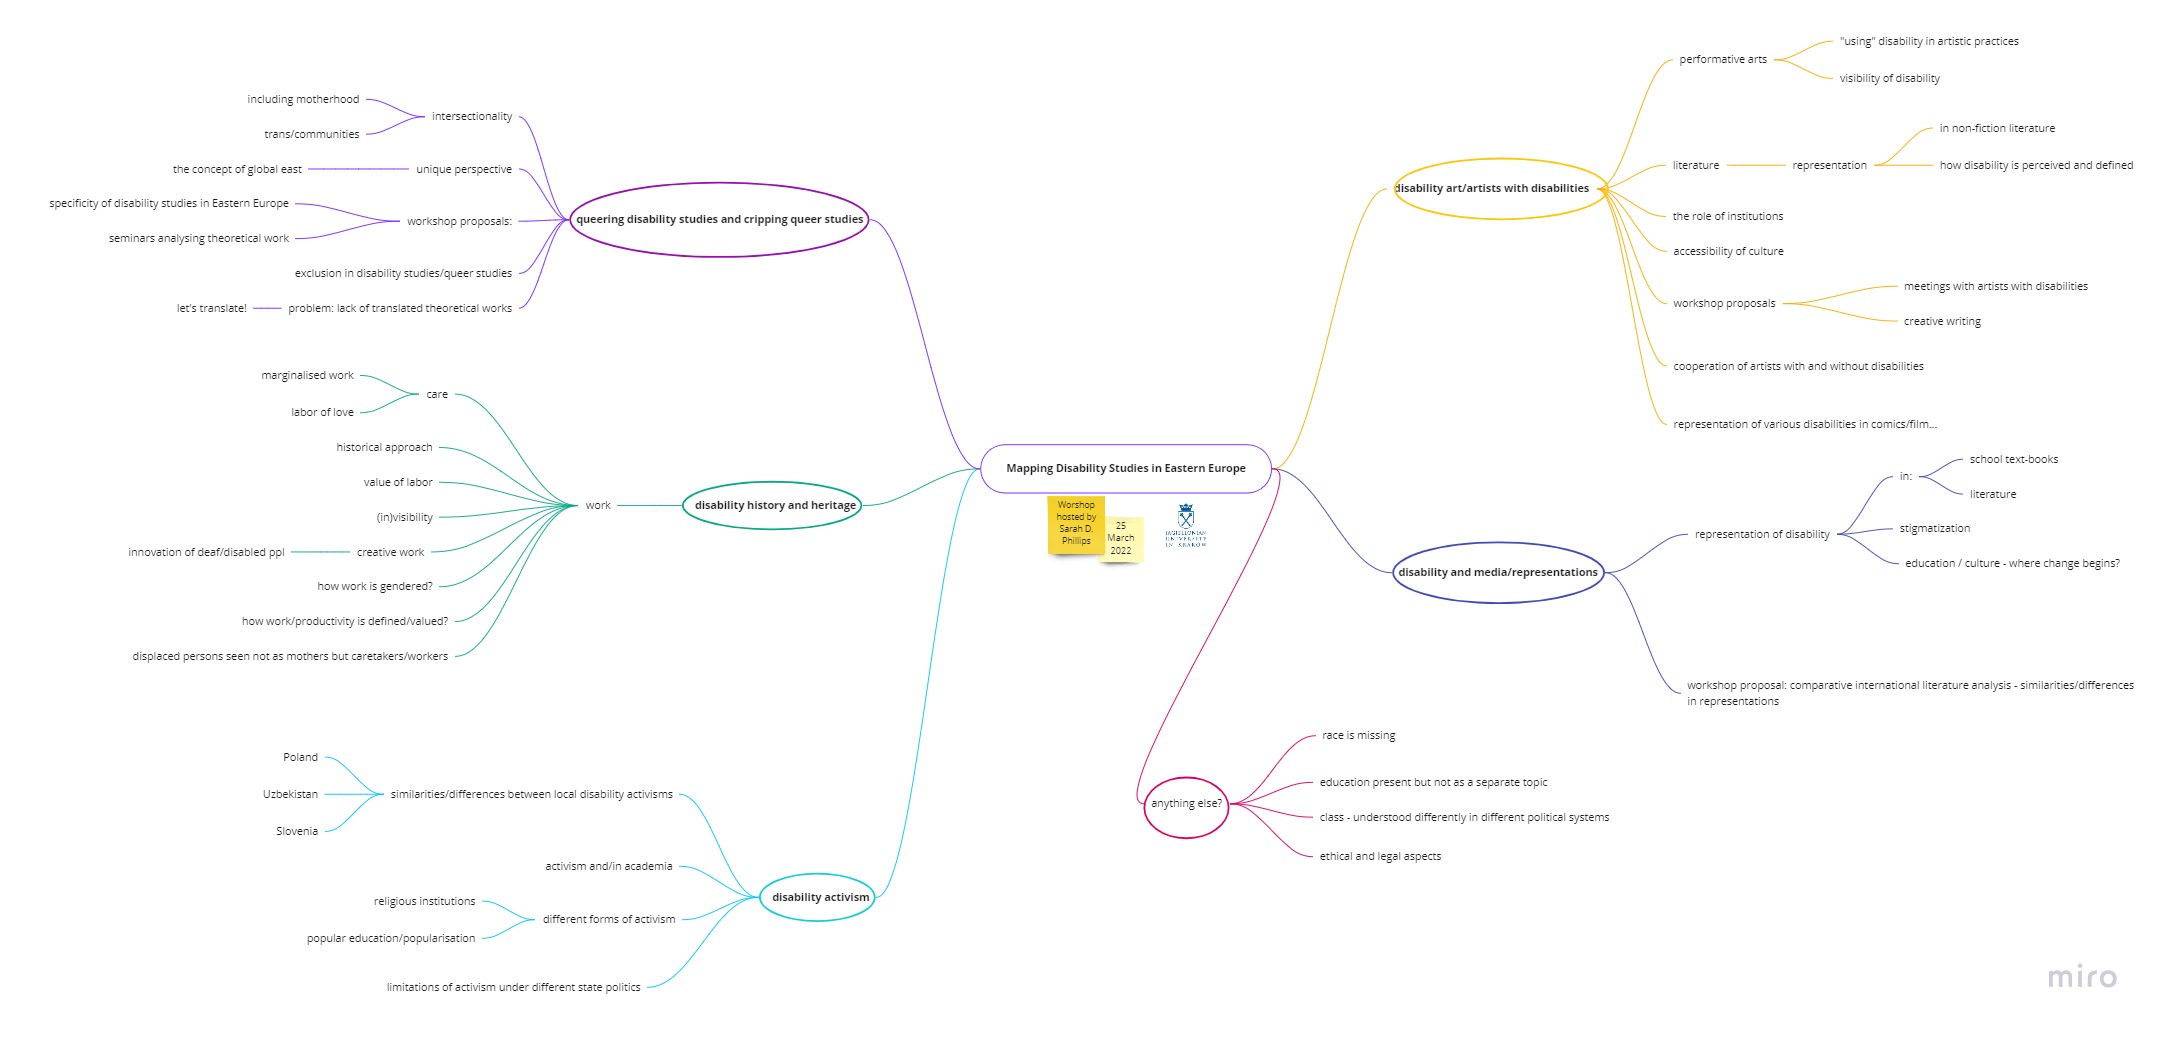 Mind map created during the workshop